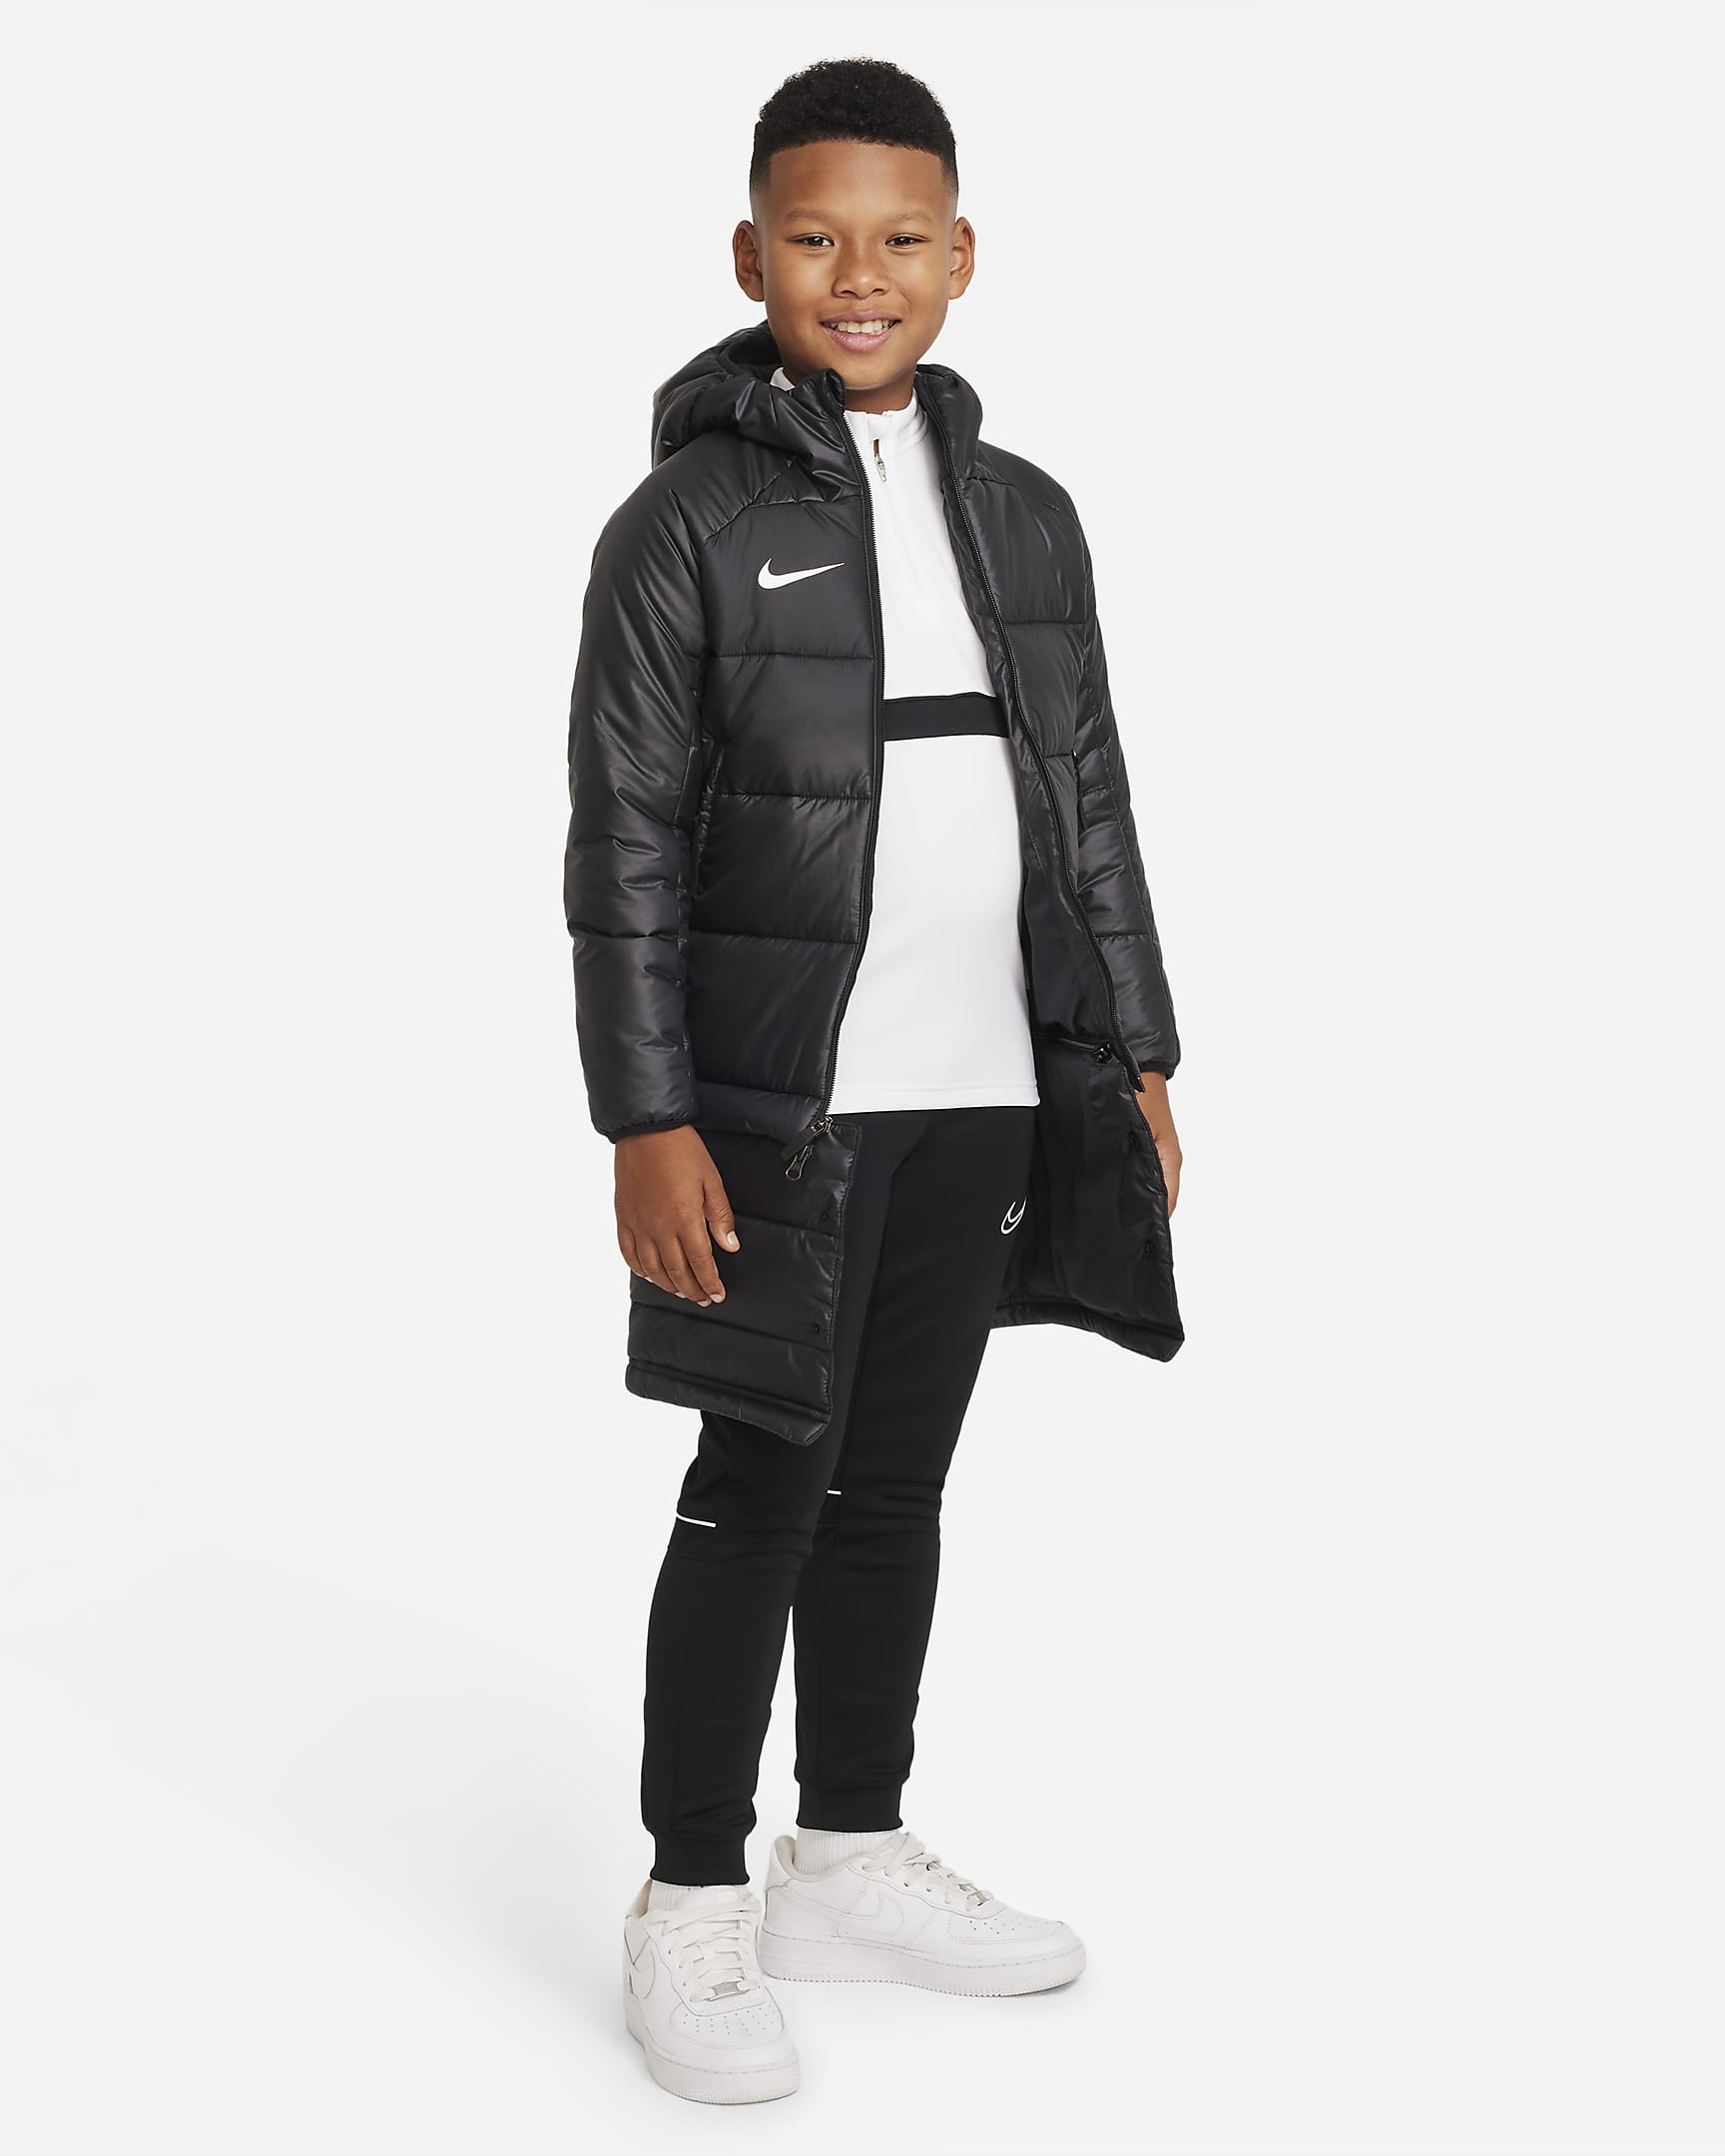 Nike Therma-FIT Academy Pro Big Kids' 2-in-1 Insulated Soccer Jacket ...